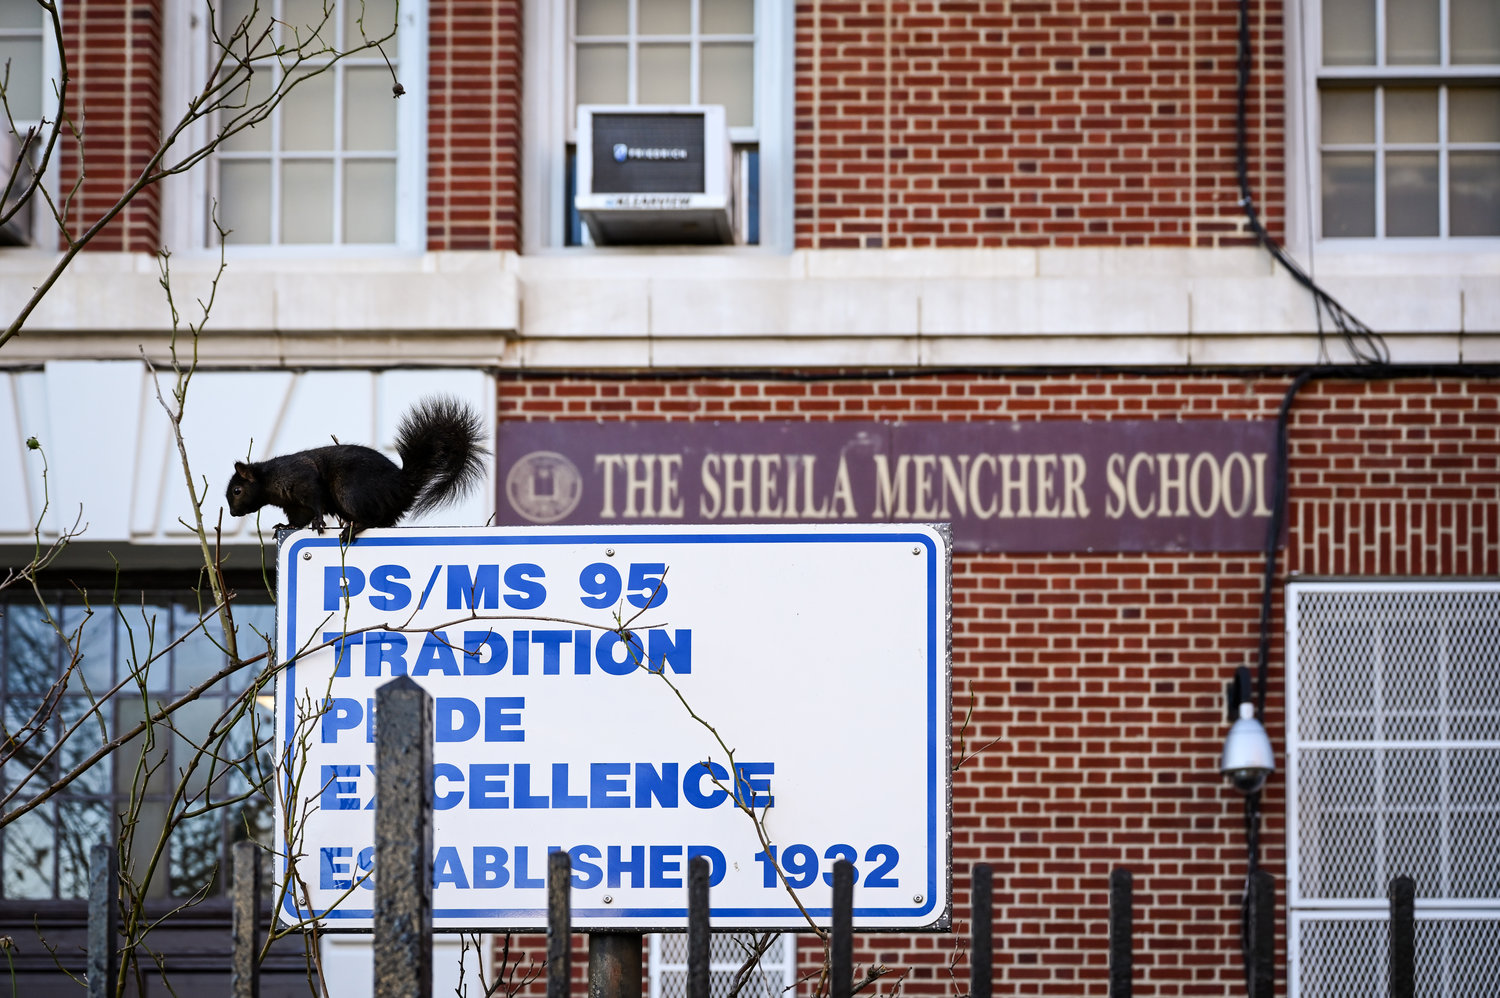 While public schools across the city closed their buildings last week — owing to the city’s weekly positive testing rate — some schools in the area, like P.S. 24 Spuyten Duyvil and P.S. 95 Sheila Mencher, already had been subjected to 14-day closures due to multiple coronavirus cases on campus.